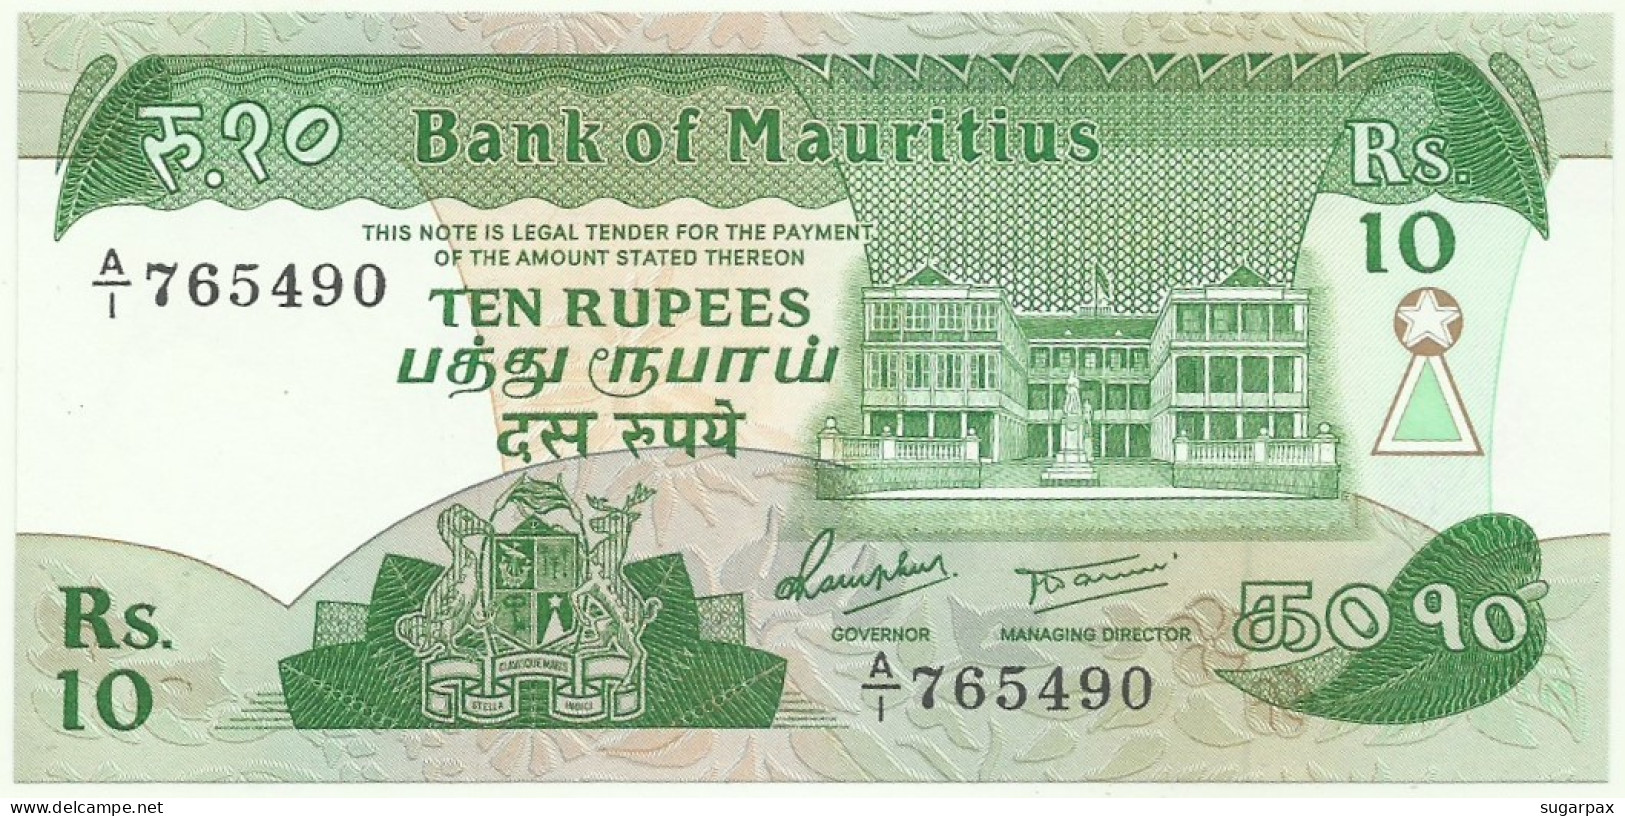 MAURITIUS - 10 RUPEES - ND ( 1985 ) - Pick 35.a - Unc. - Sign. 5 - Serie A/1 - Mauritius